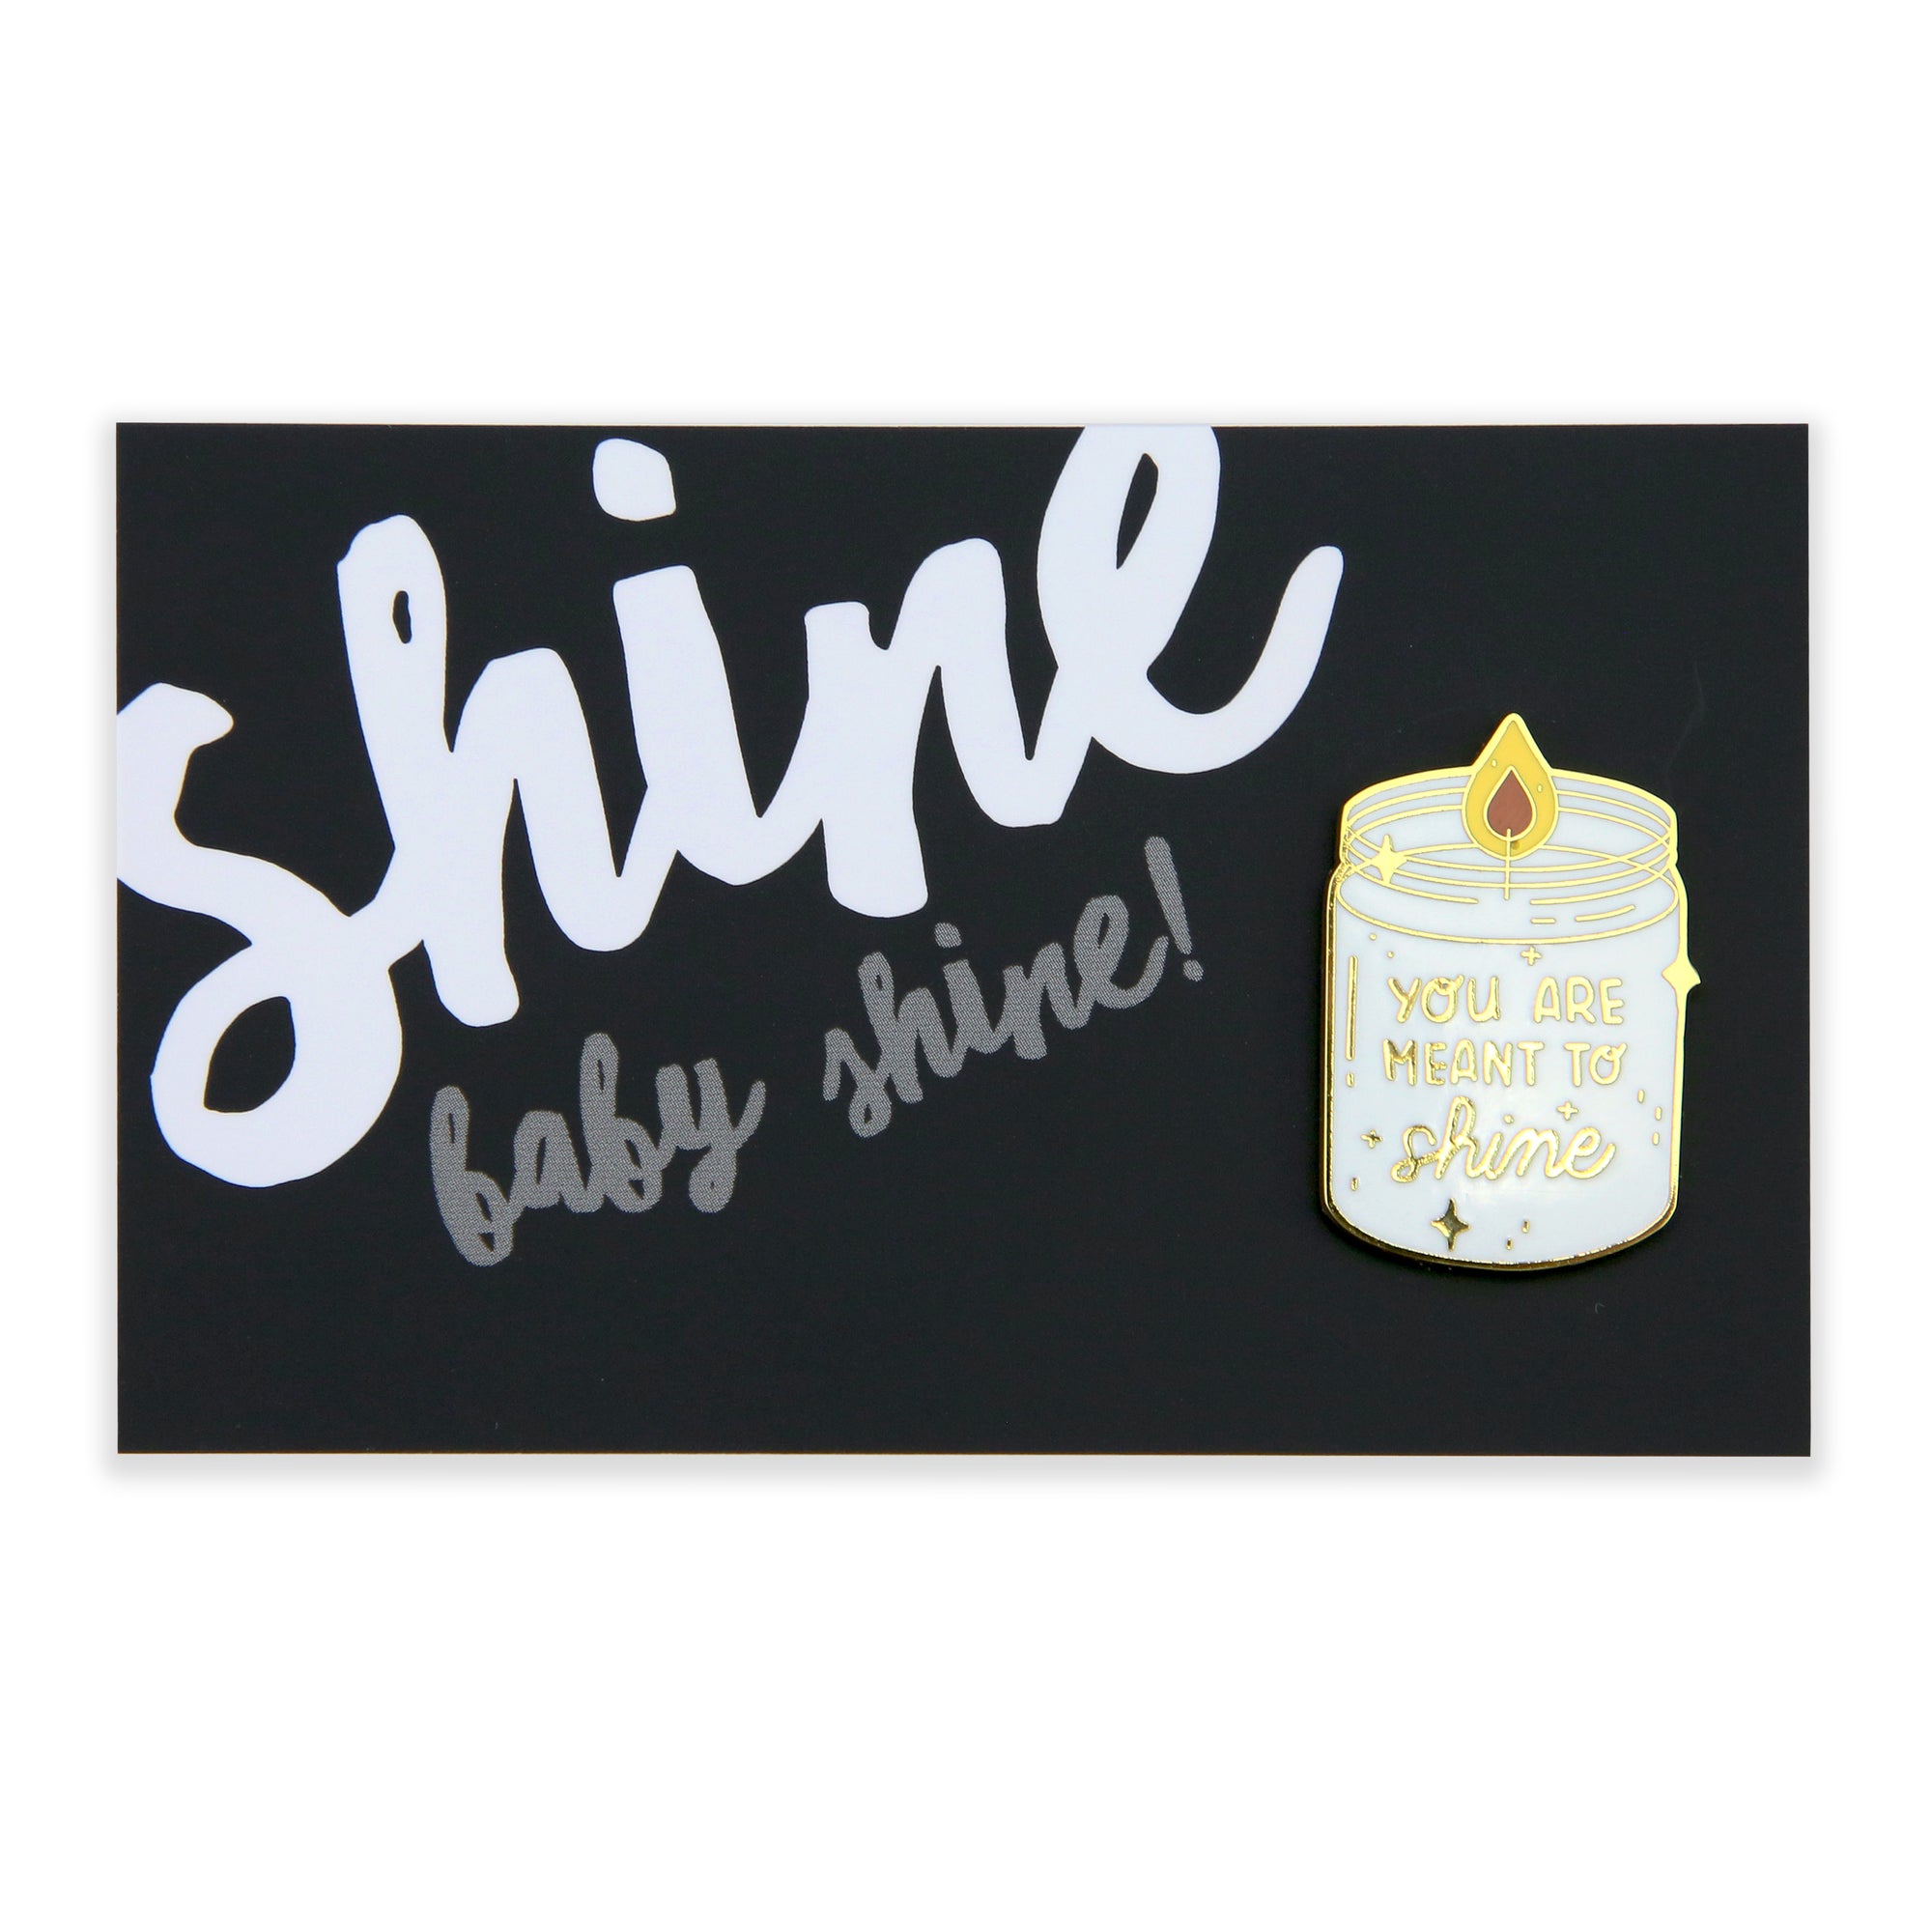 Lovely Pins! Shine baby Shine - 'You are Meant to Shine' Candle Enamel Badge Pin - (10313)